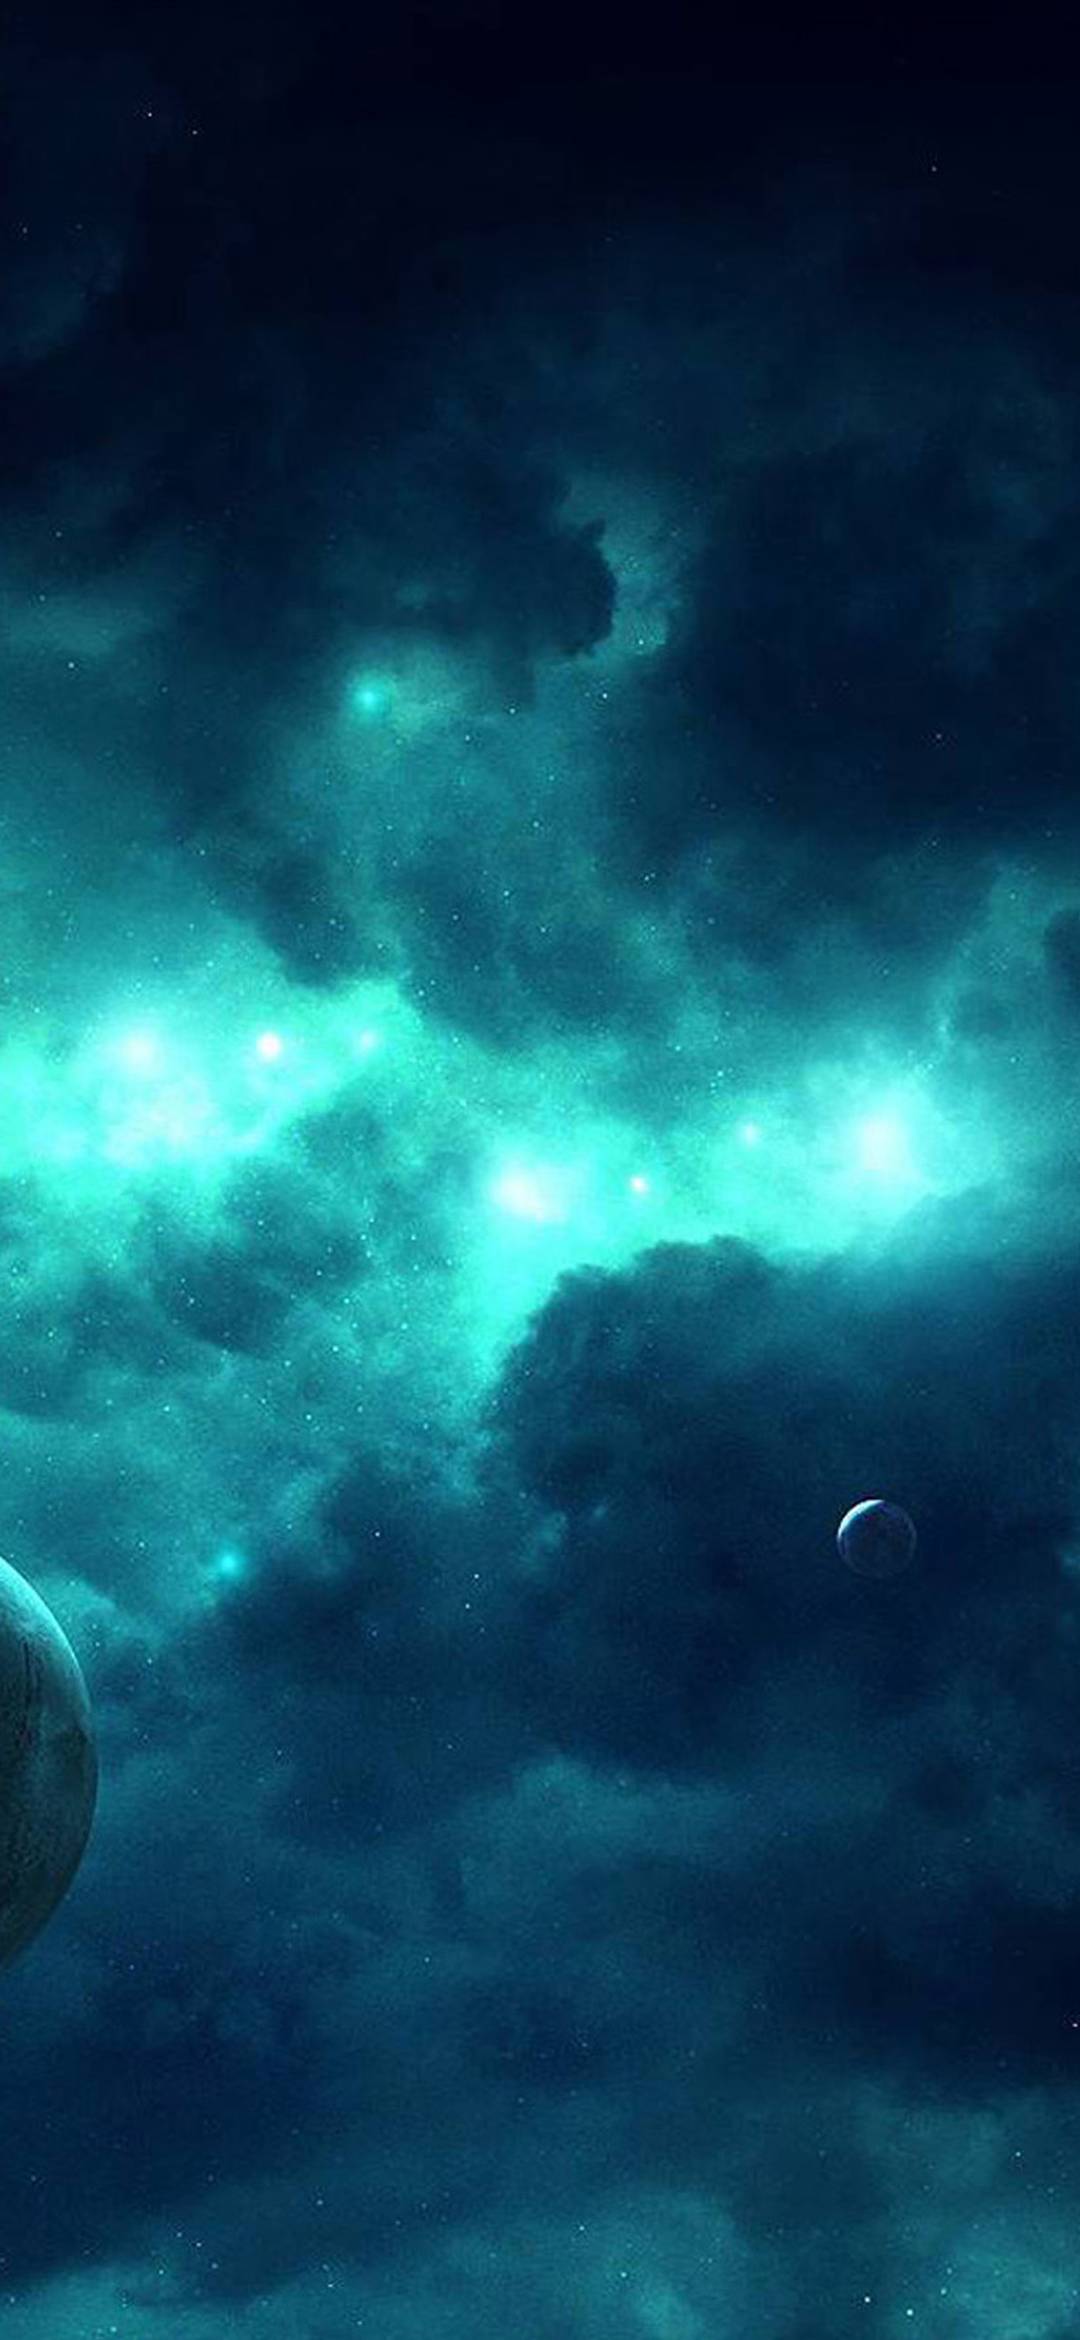 Space Wallpaper for Phone- 224